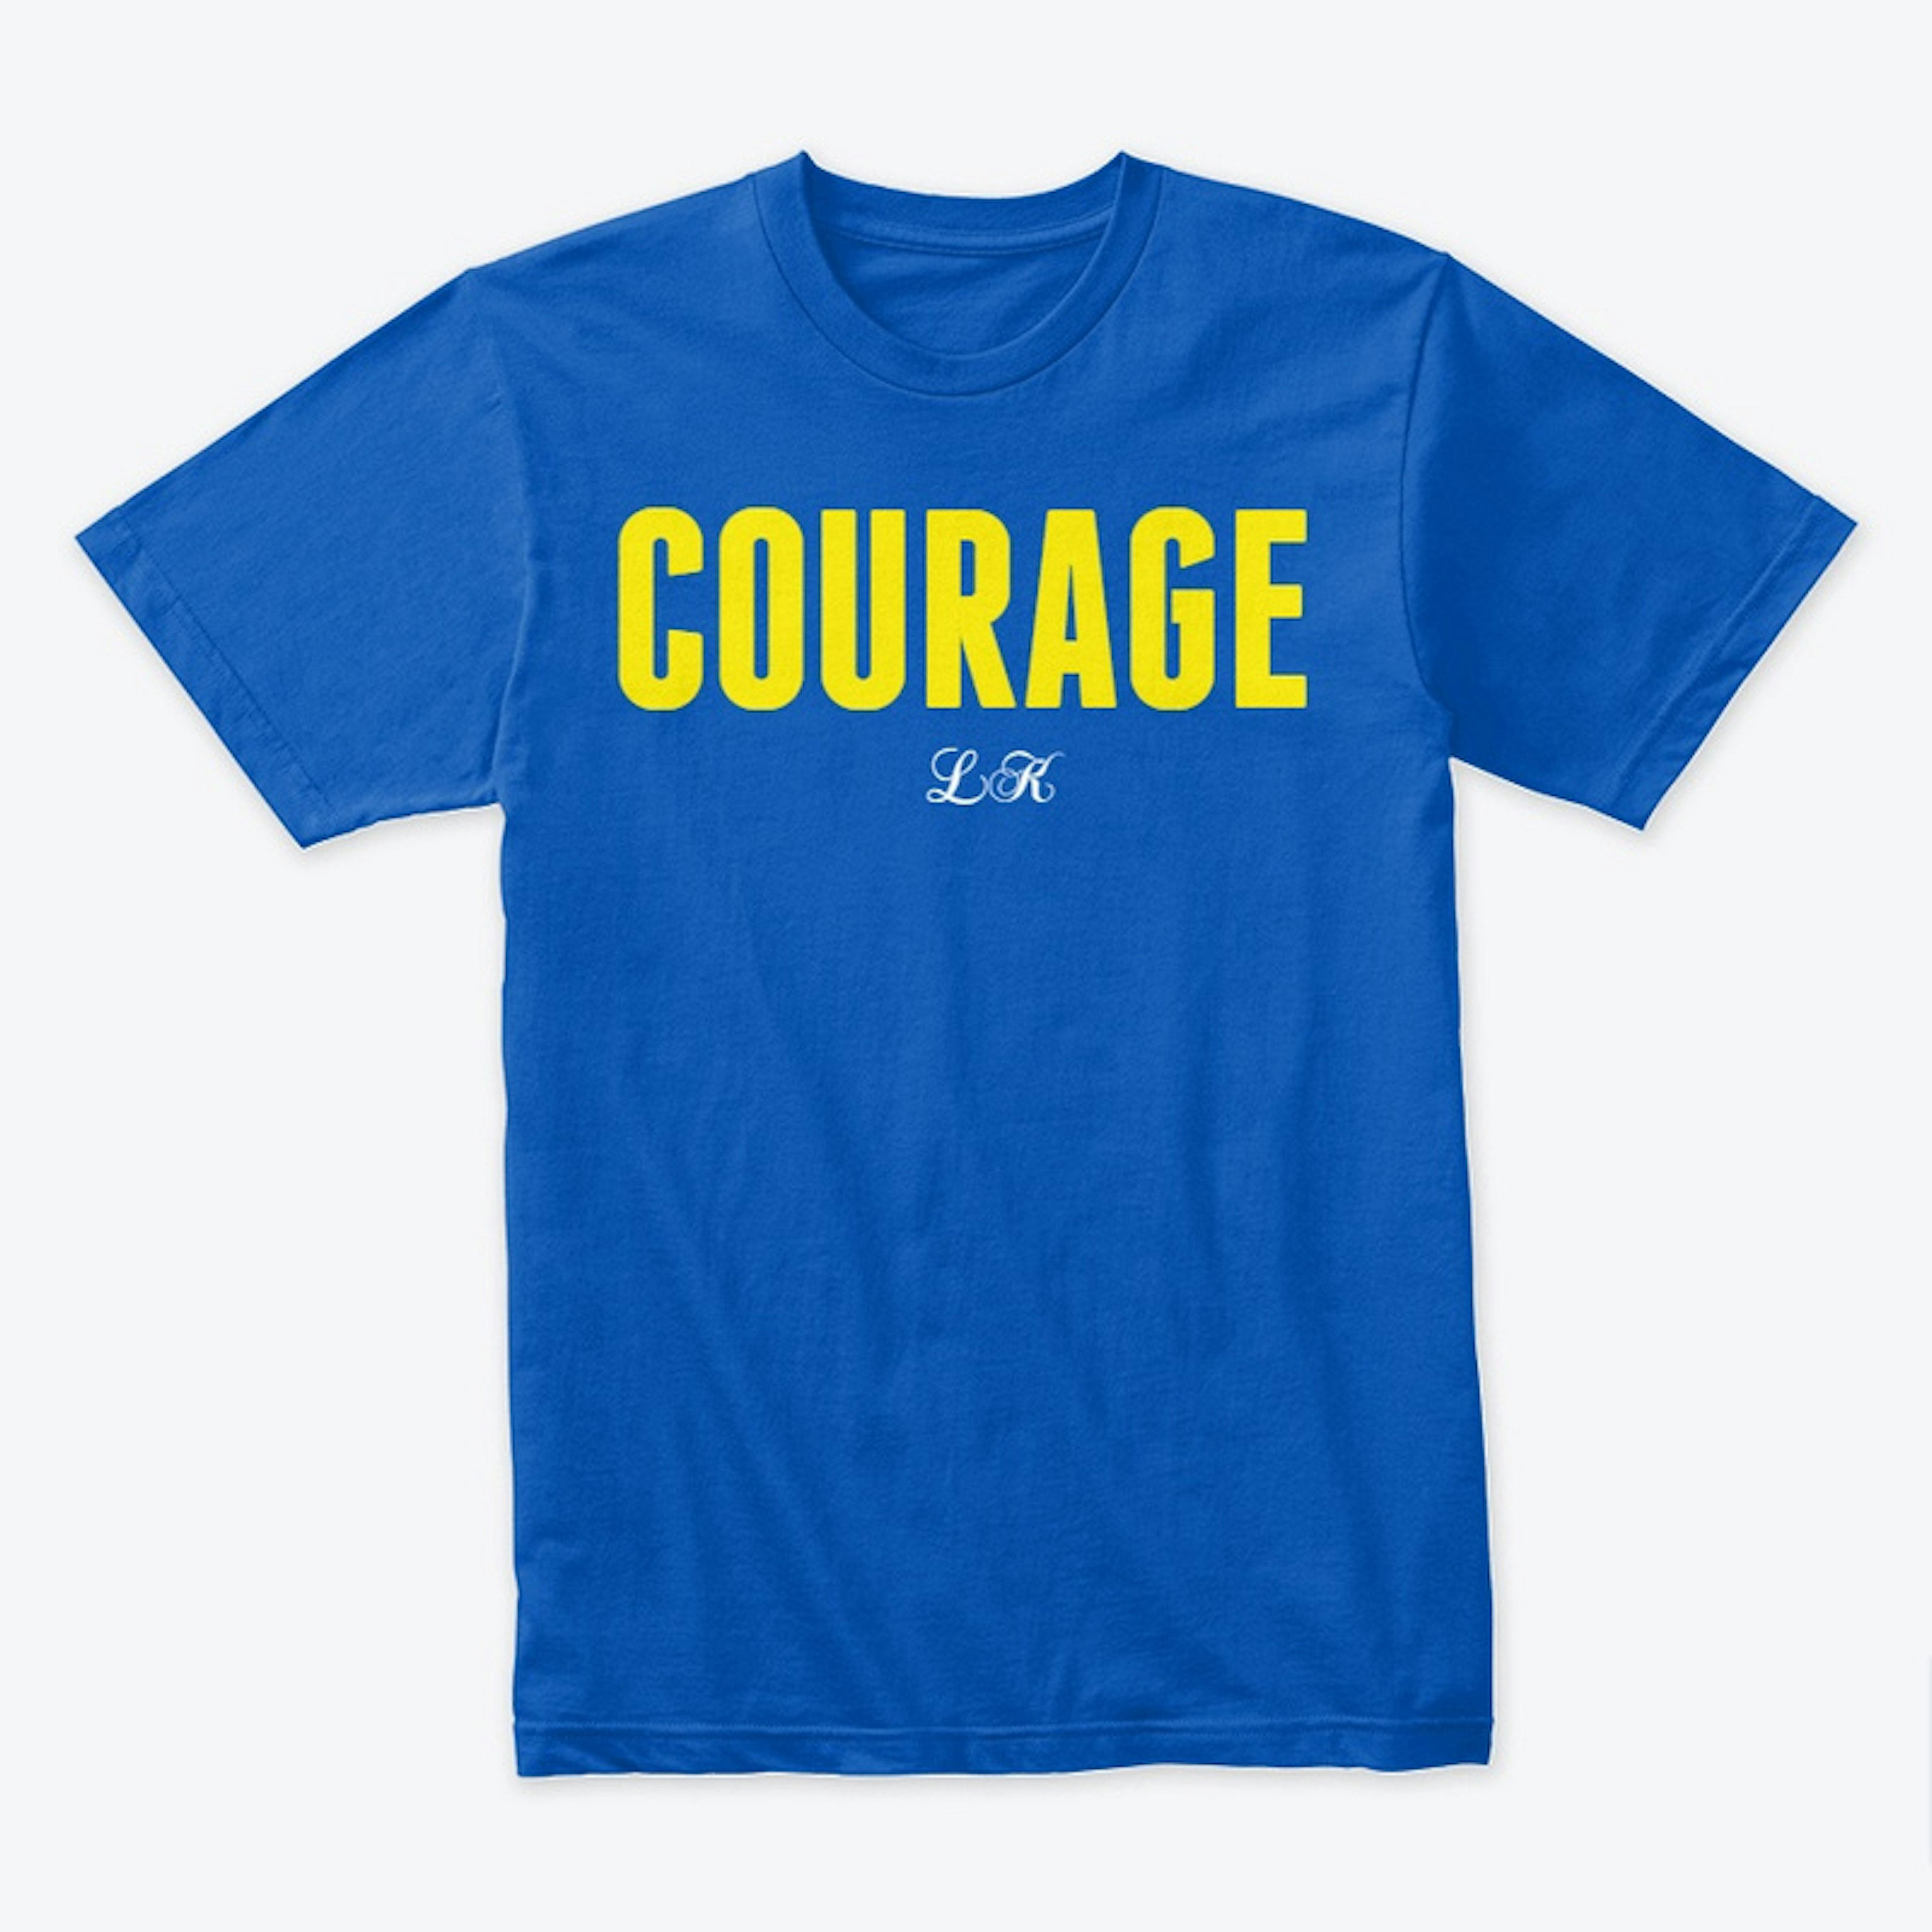 COURAGE by LK